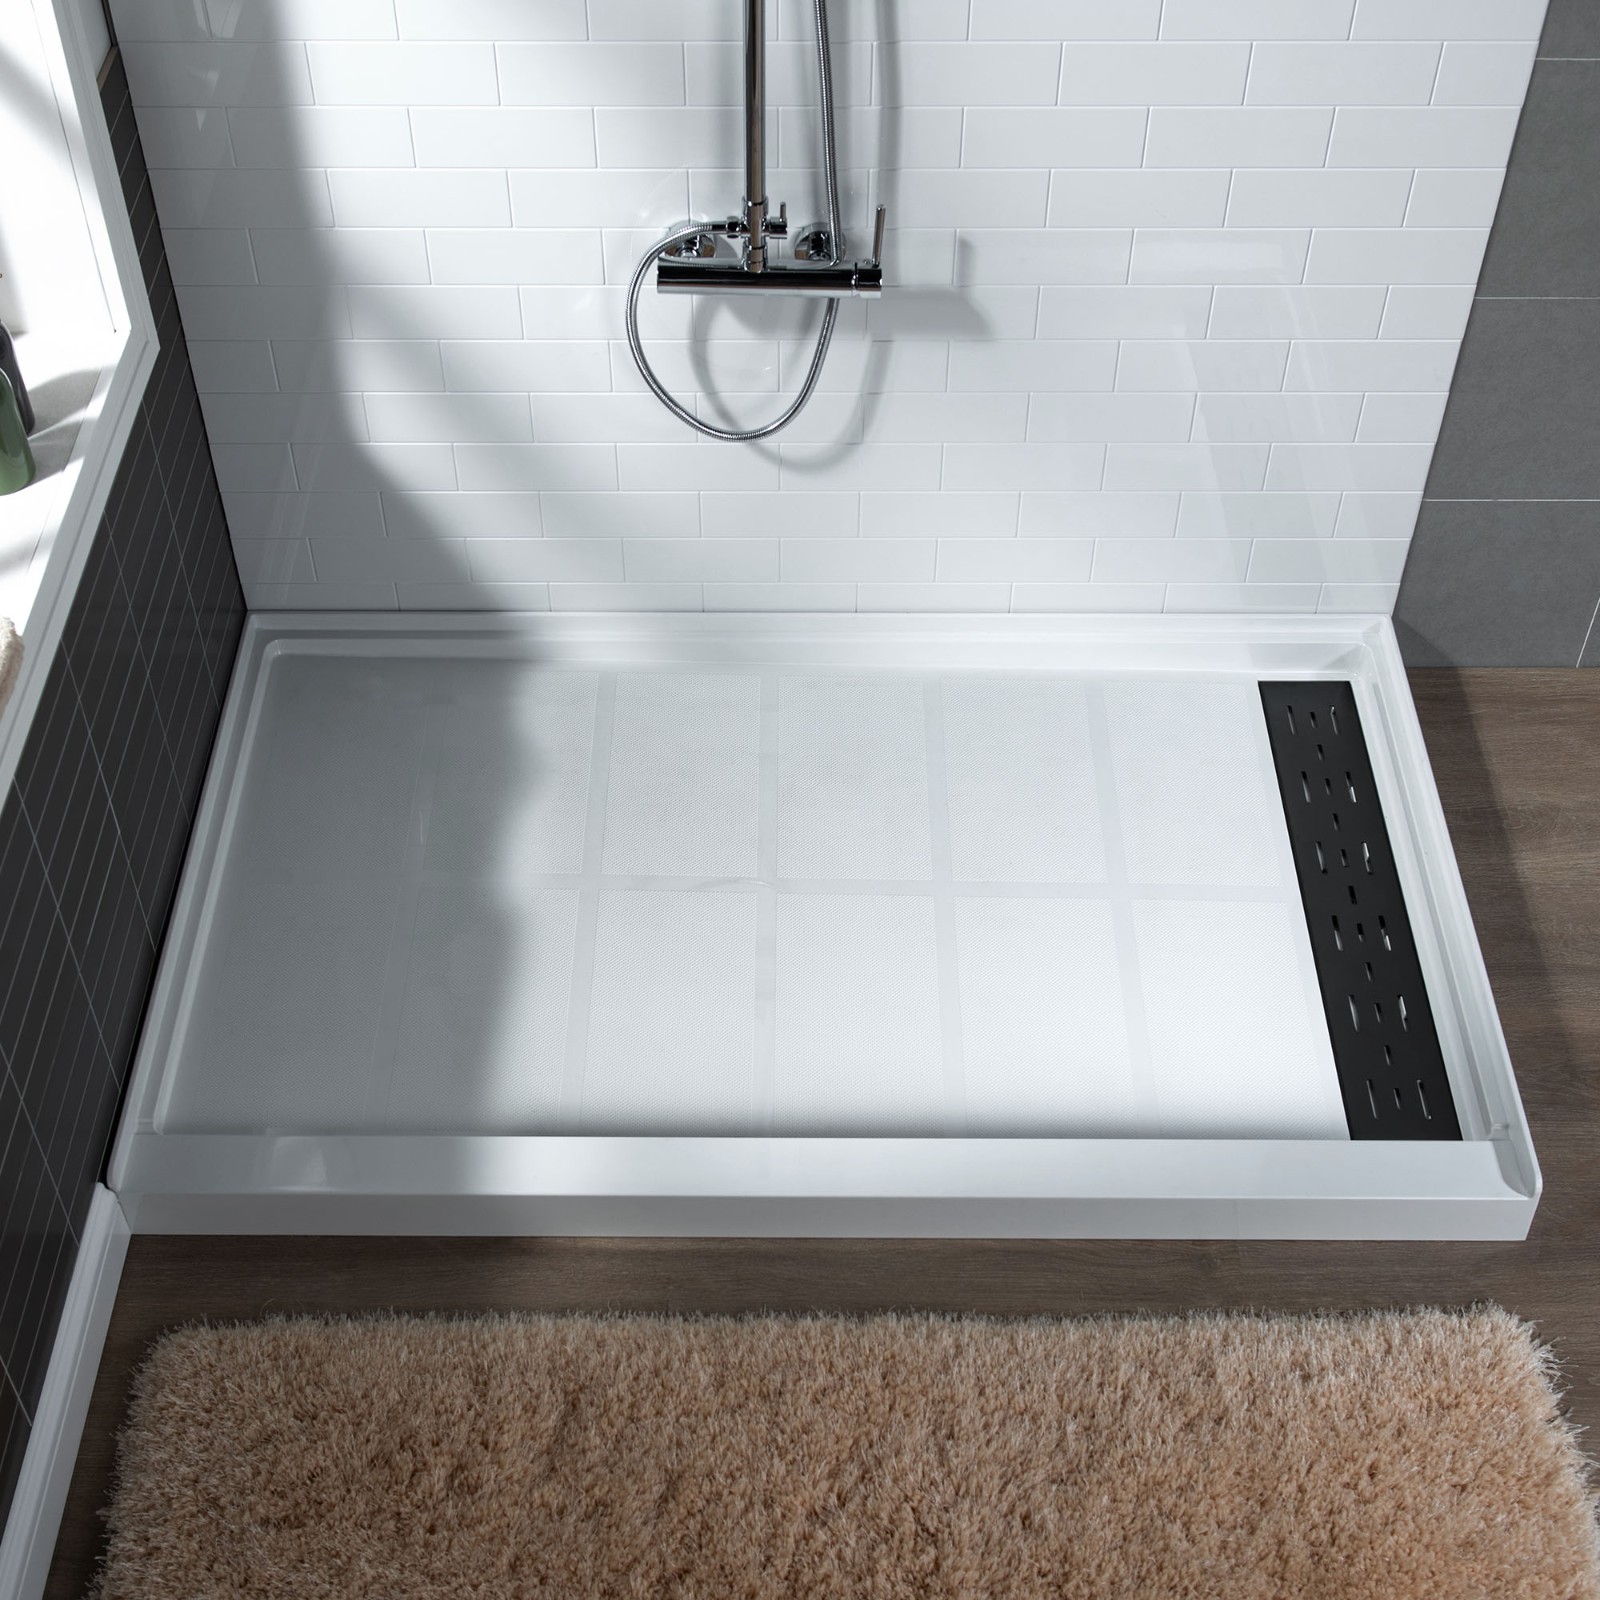  WOODBRIDGE SBR6034-1000R-MB SolidSurface Shower Base with Recessed Trench Side Including Matte Black Linear Cover, 60